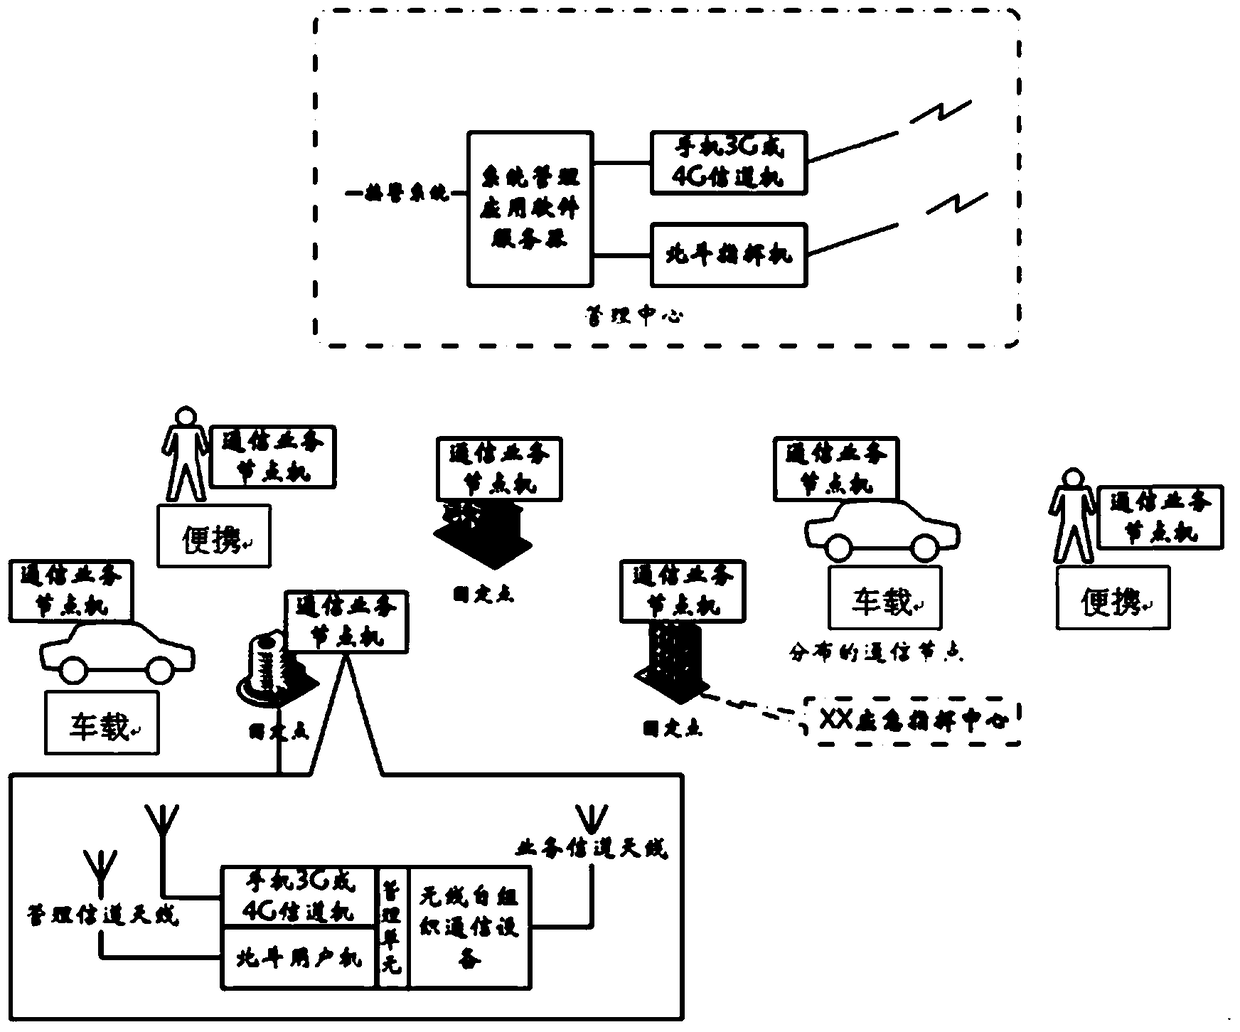 An Urban Emergency Broadband Communication System Based on Temporary Communication Resources